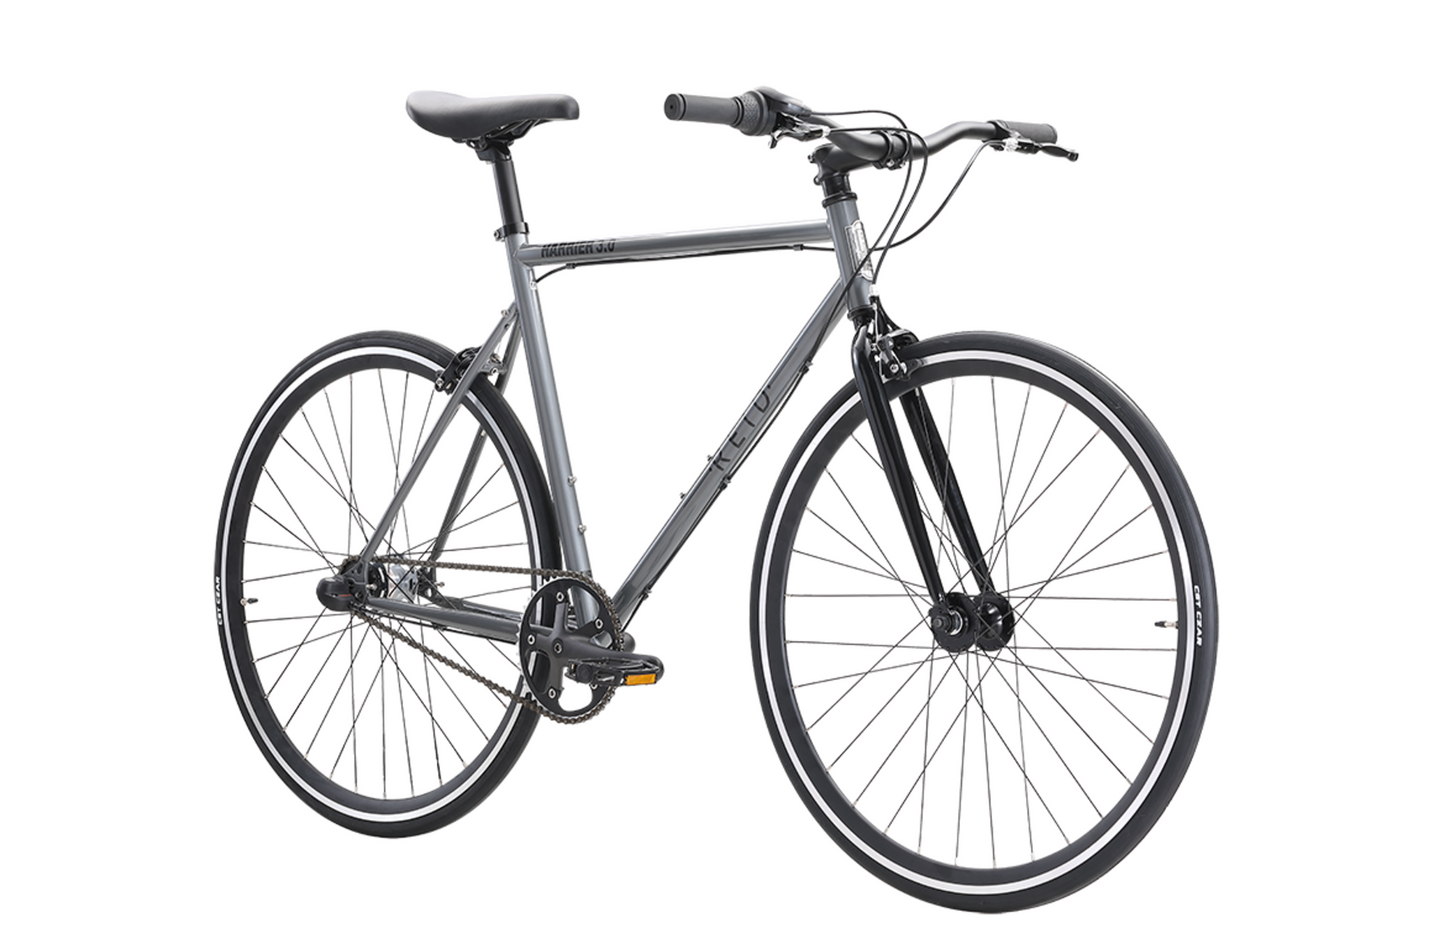 Harrier 3.0 fixie style bike in black grey showing on front angle from Reid Cycles Australia